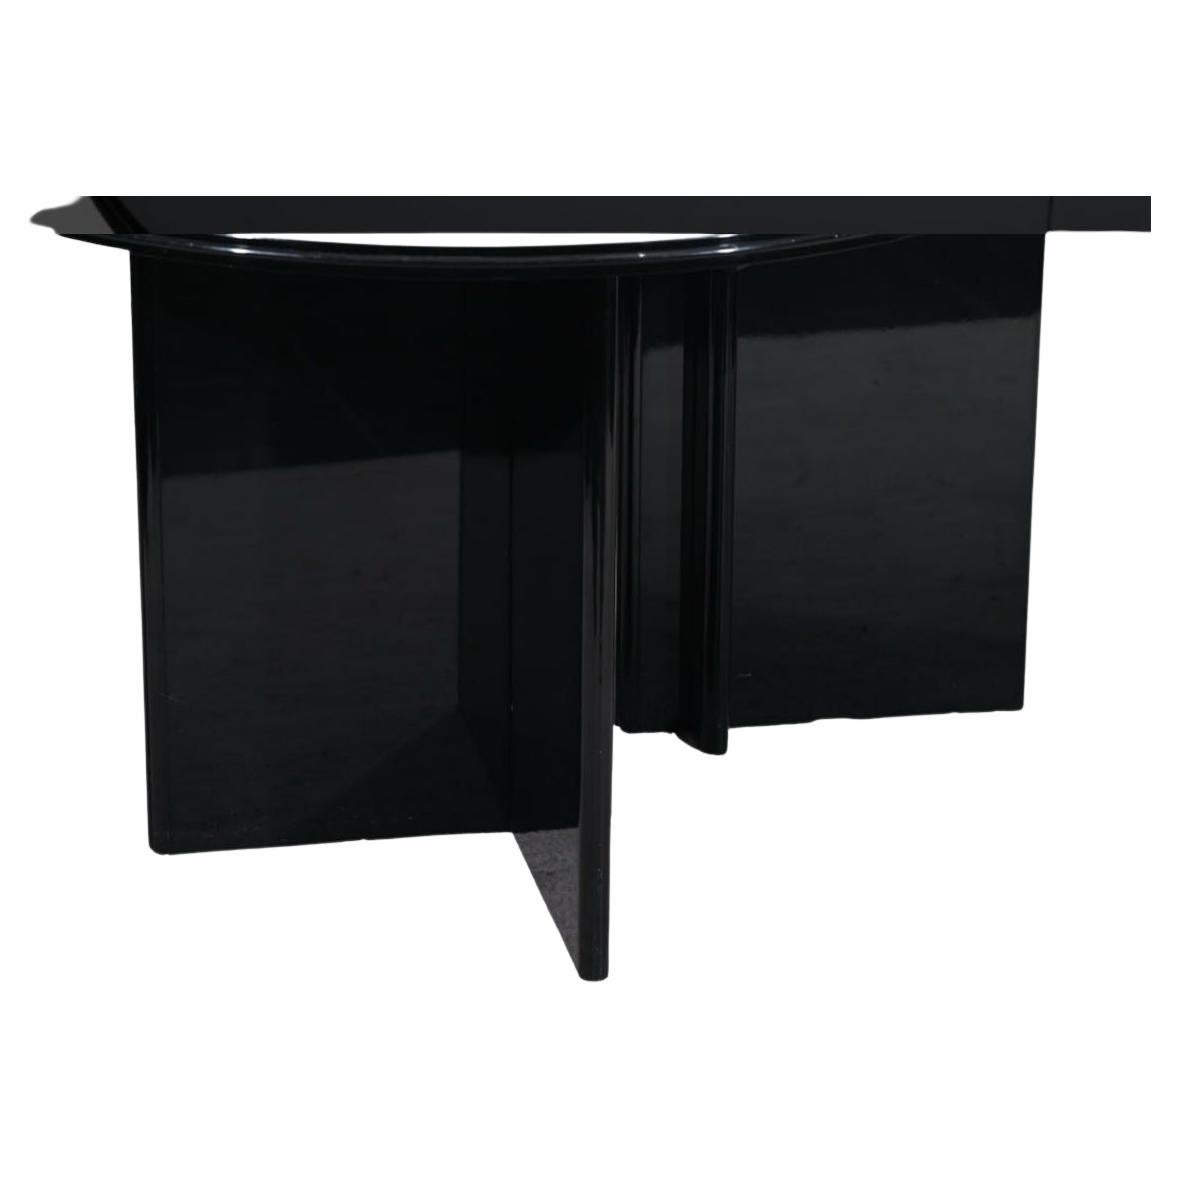 Italian Post Modern Black Lacquered Double Pedestal Oval Dining Table with Leaf For Sale